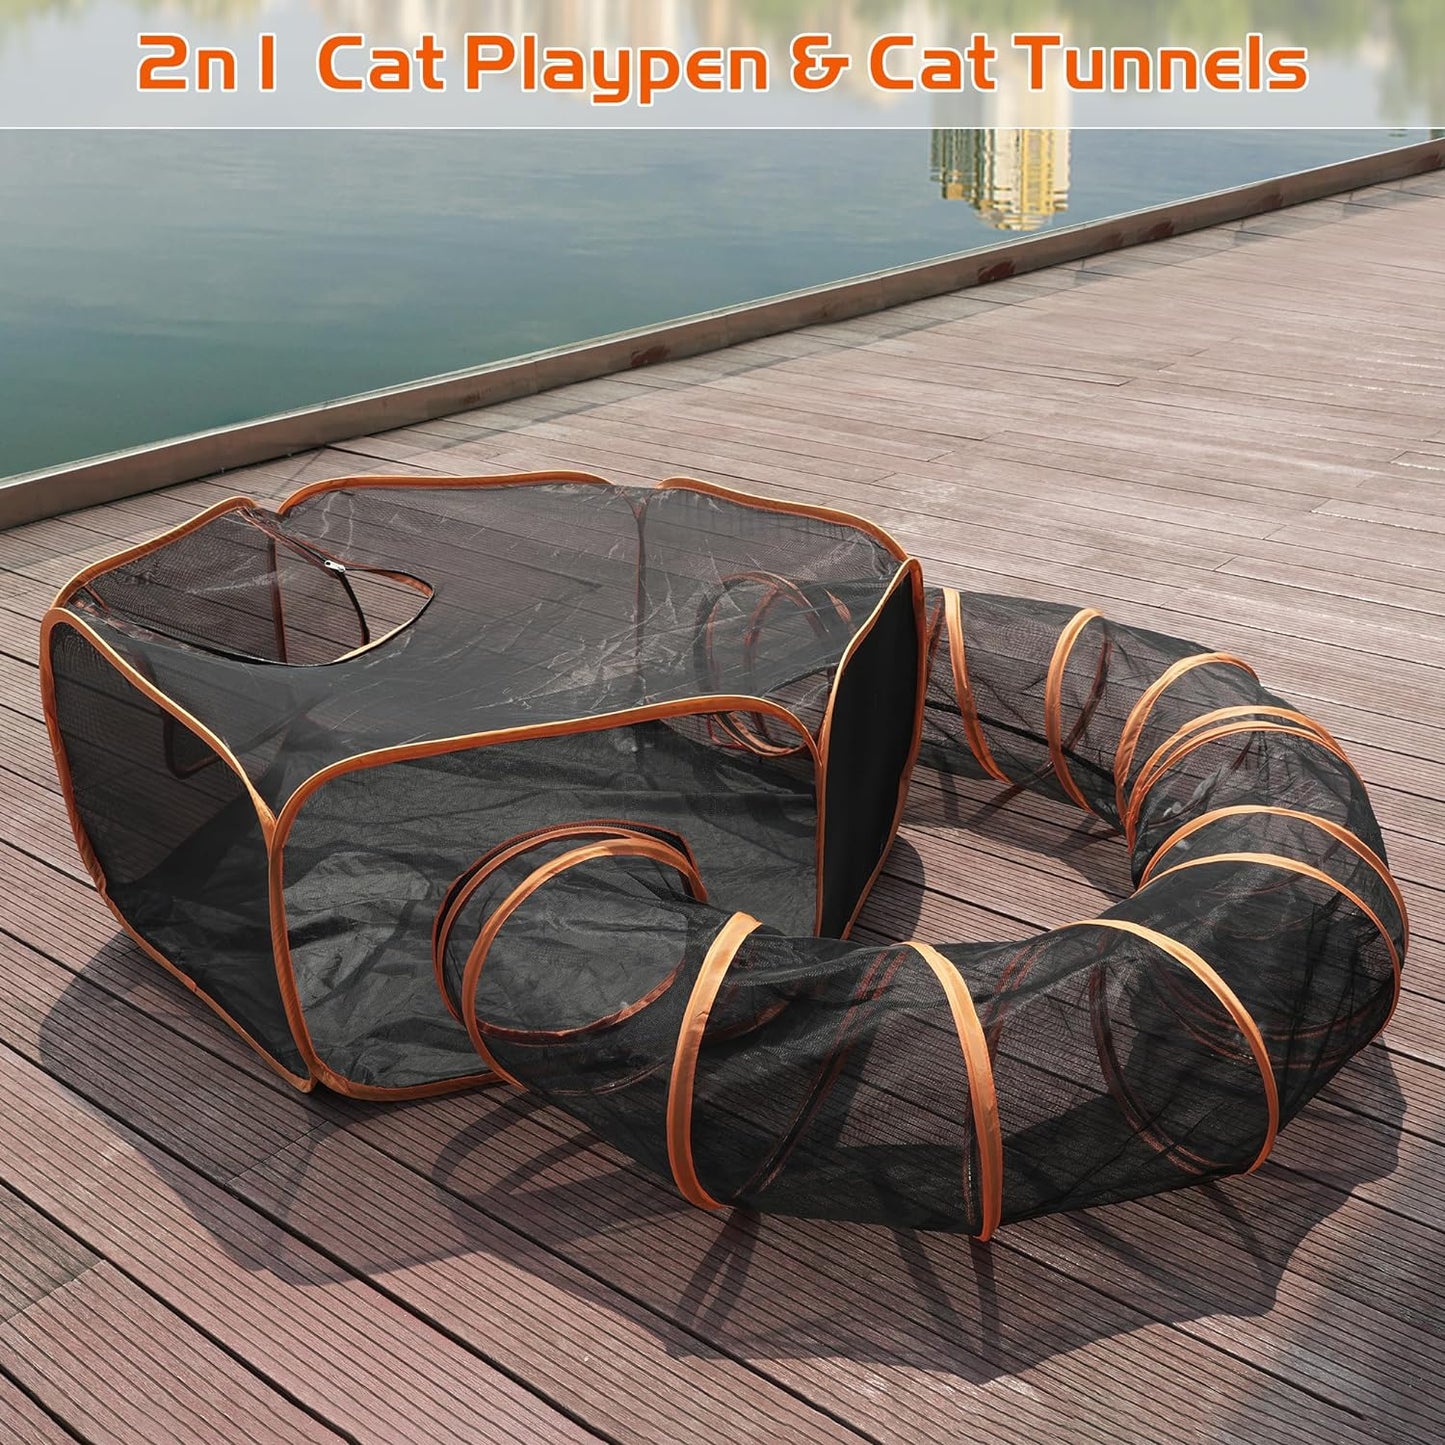 MAMI&BABI Outdoor Cat Enclosures, Portable Cat Tent for Outside Cat Playpen Enclosed with Tunnel, Catio Cat Enclosure for Indoor Cats and Other Small Animals